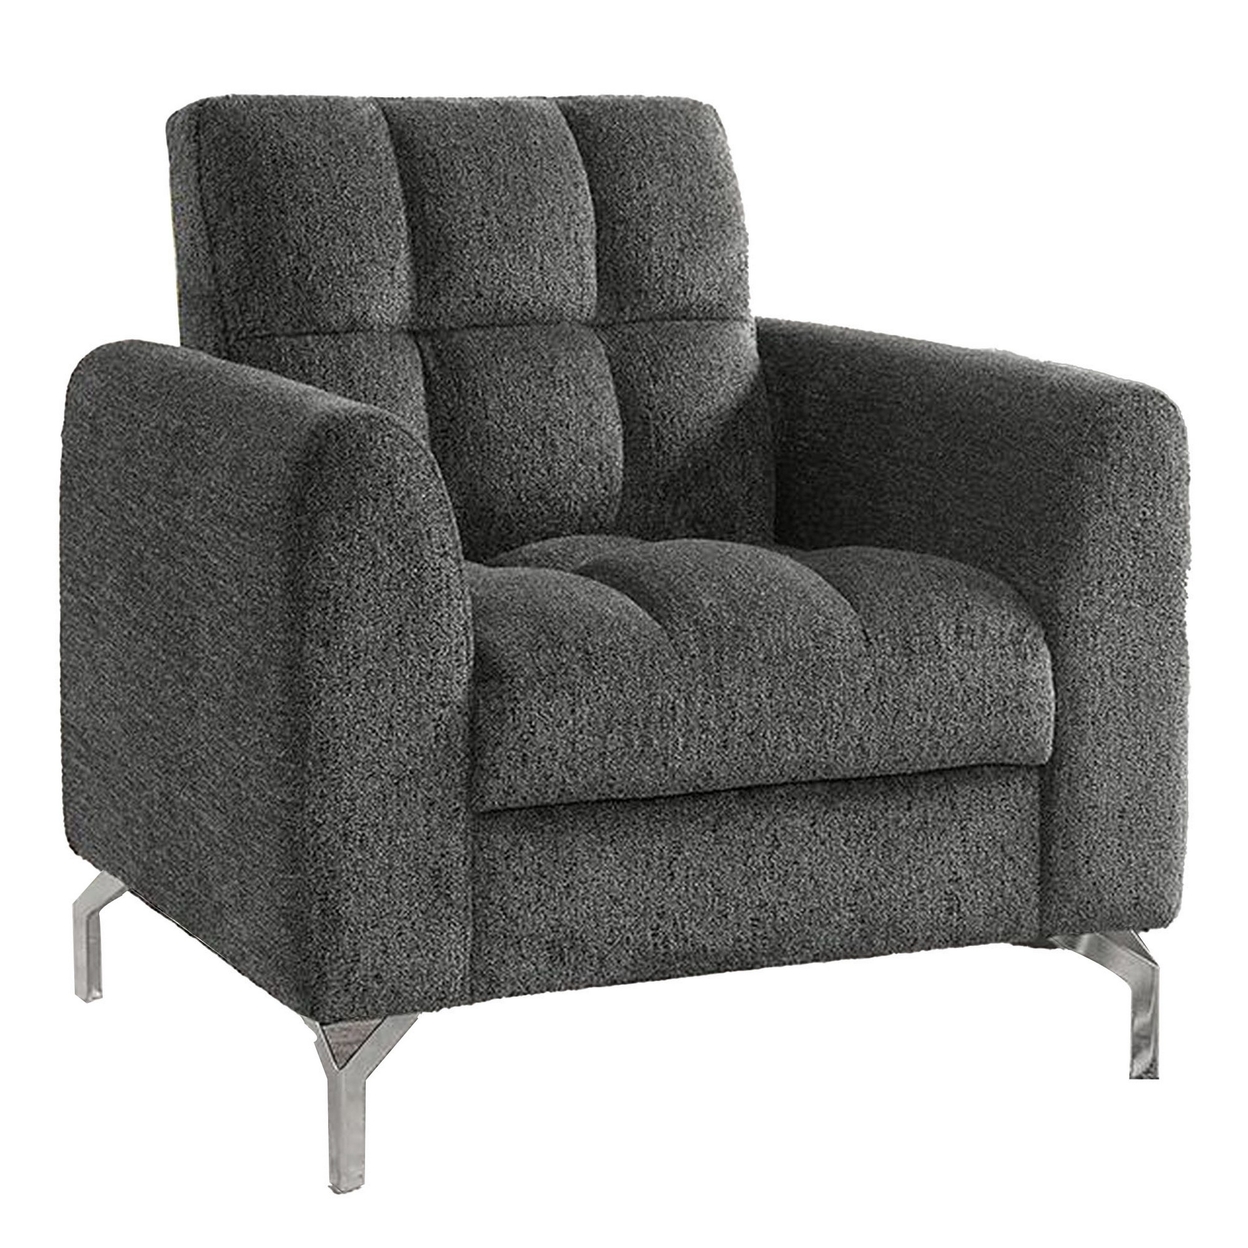 Lupe 35 Inch Chair, Biscuit Tufted, Chrome Legs, Gray Chenille Upholstery - Saltoro Sherpi